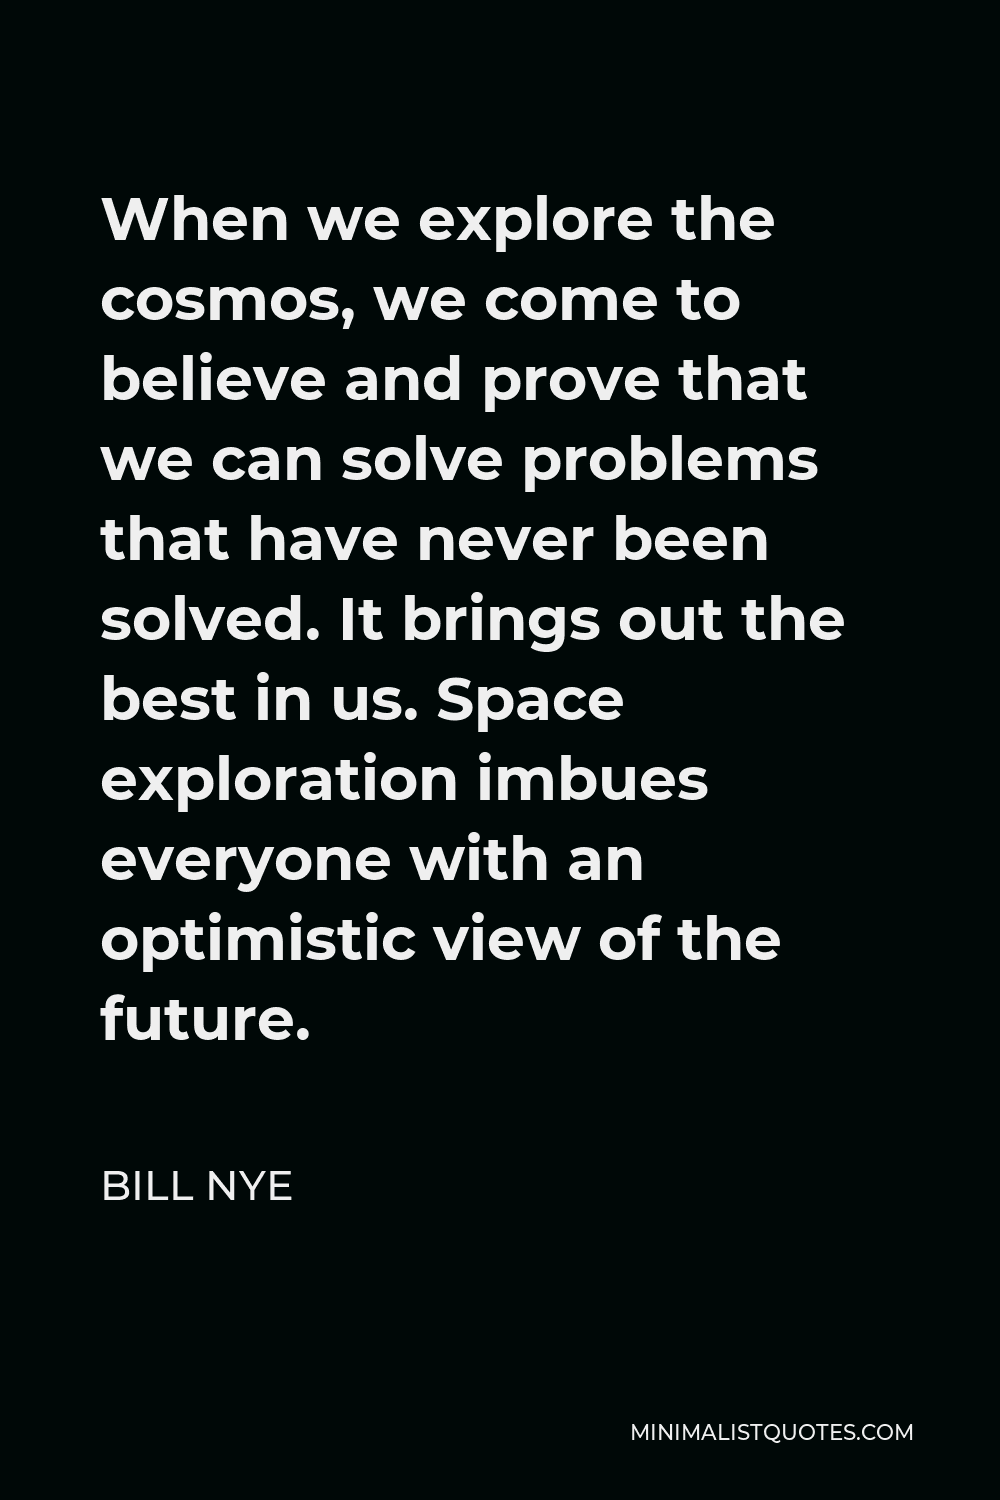 Bill Nye Quote - When we explore the cosmos, we come to believe and prove that we can solve problems that have never been solved. It brings out the best in us. Space exploration imbues everyone with an optimistic view of the future.